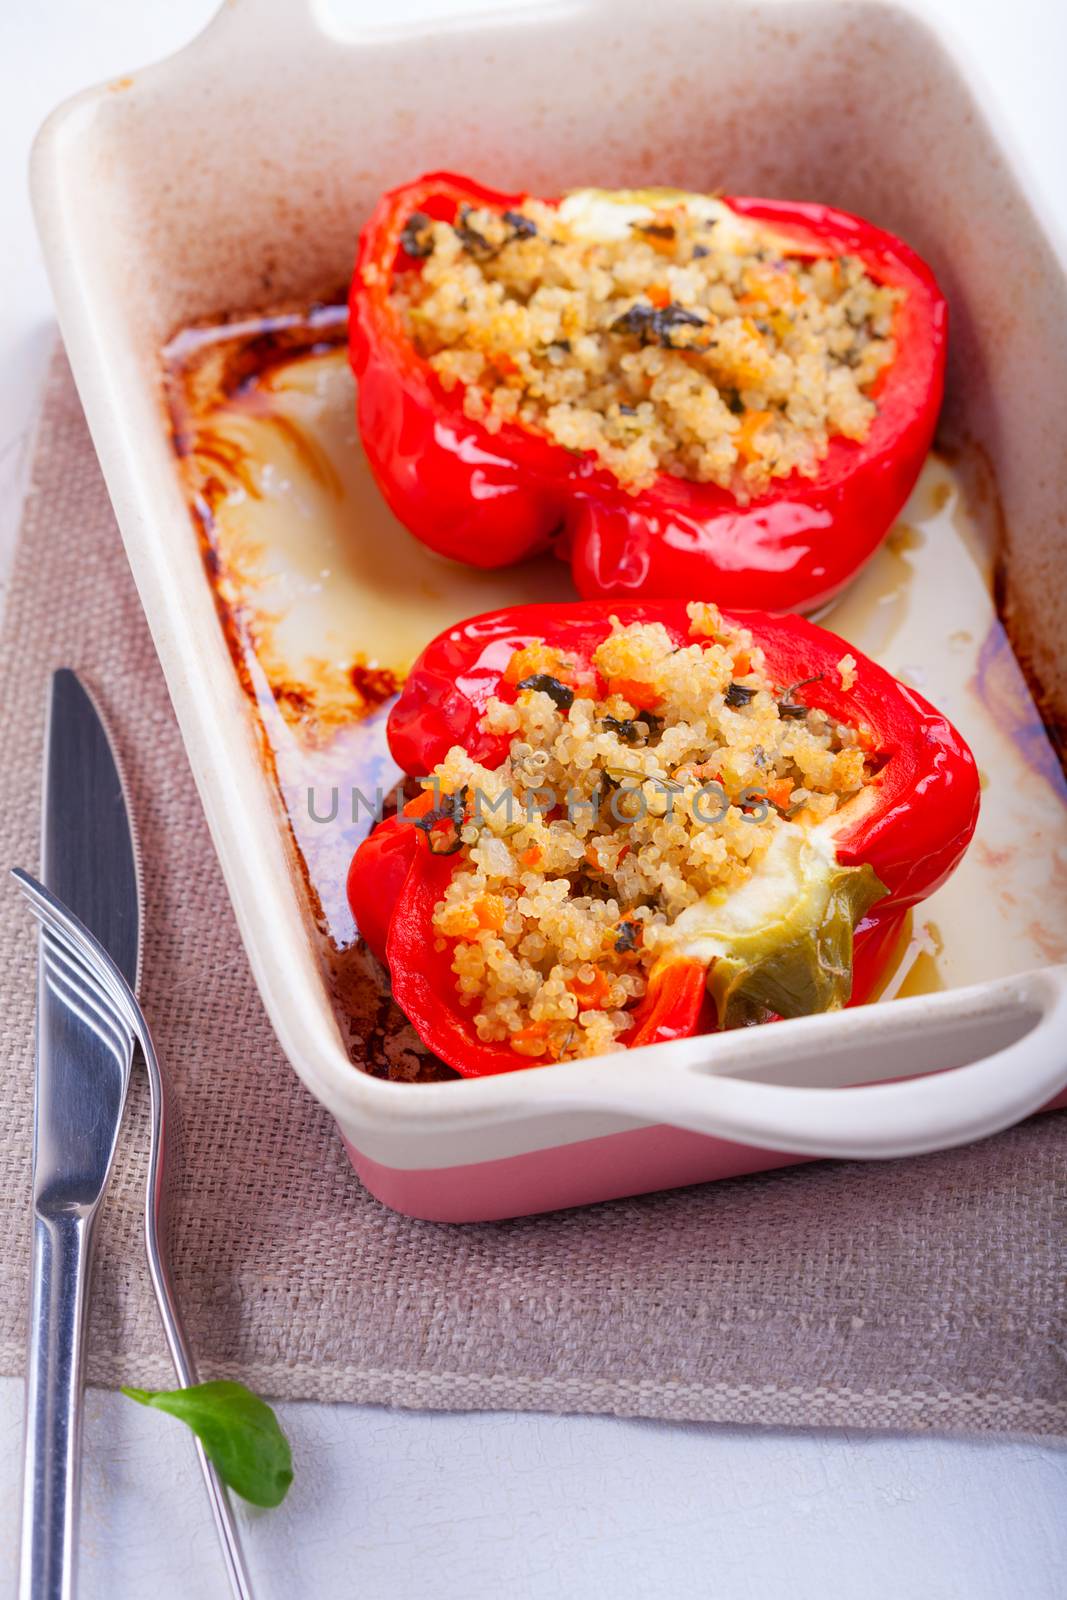 Stuffed red peppers filled with quinoa and vegetables